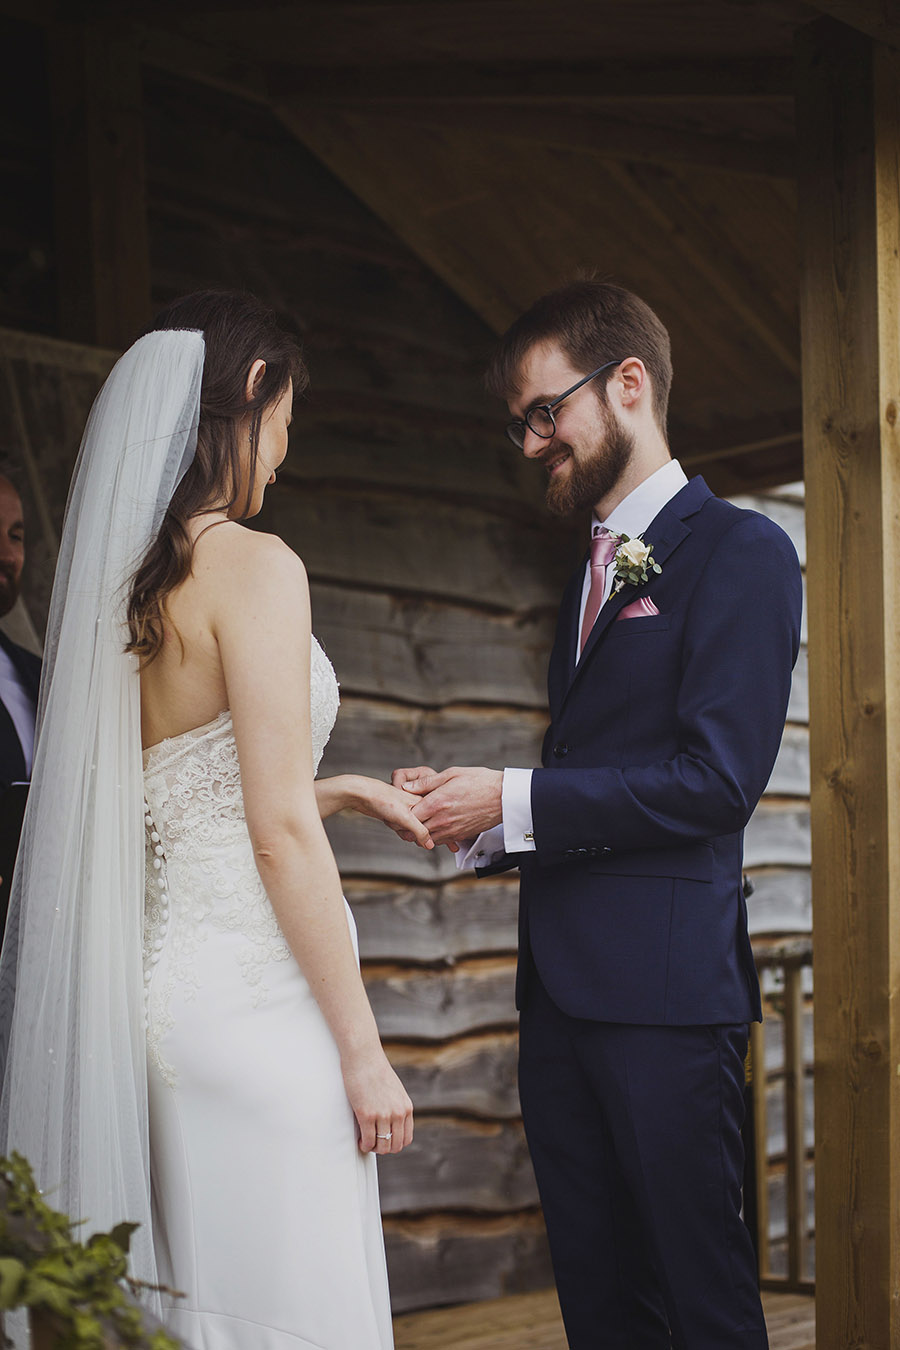 Relaxed outdoor wedding at Cott Farm Barn with images by Heather Birnie Photography on the English Wedding Blog (19)